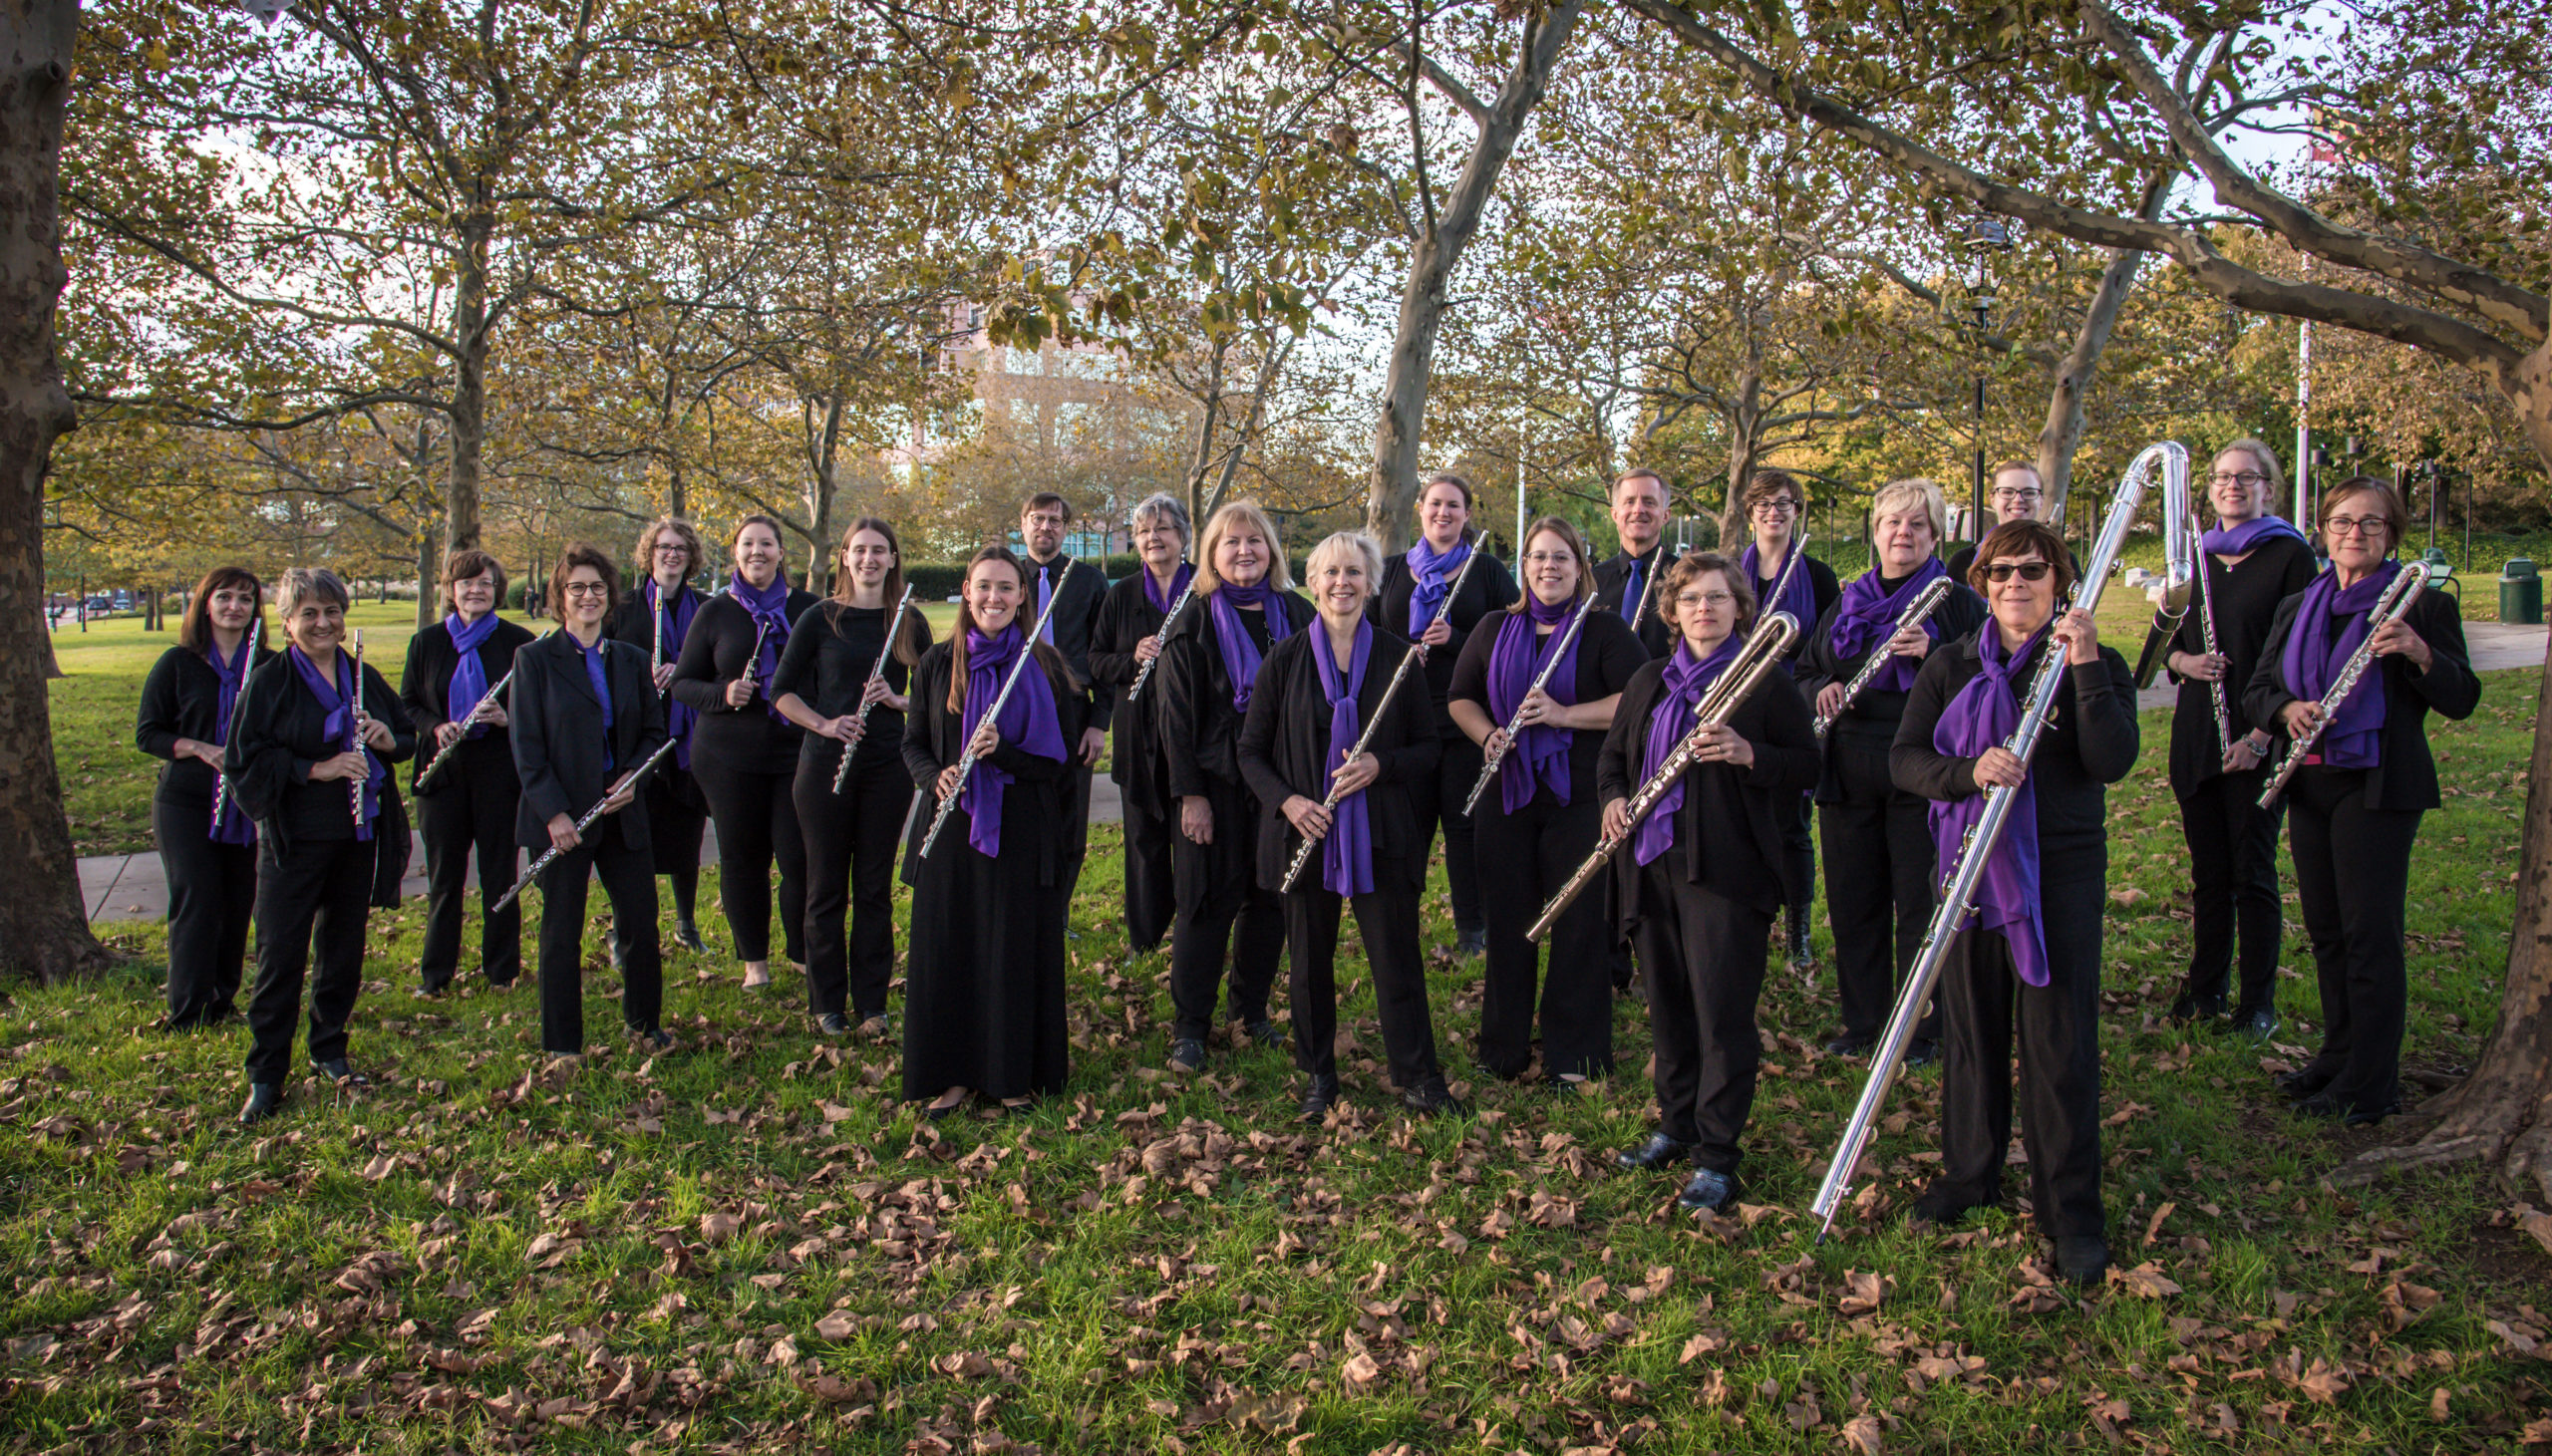 Baltimore Flute Choir in world premiere of “Prayer for Ukraine” by Maryland composer